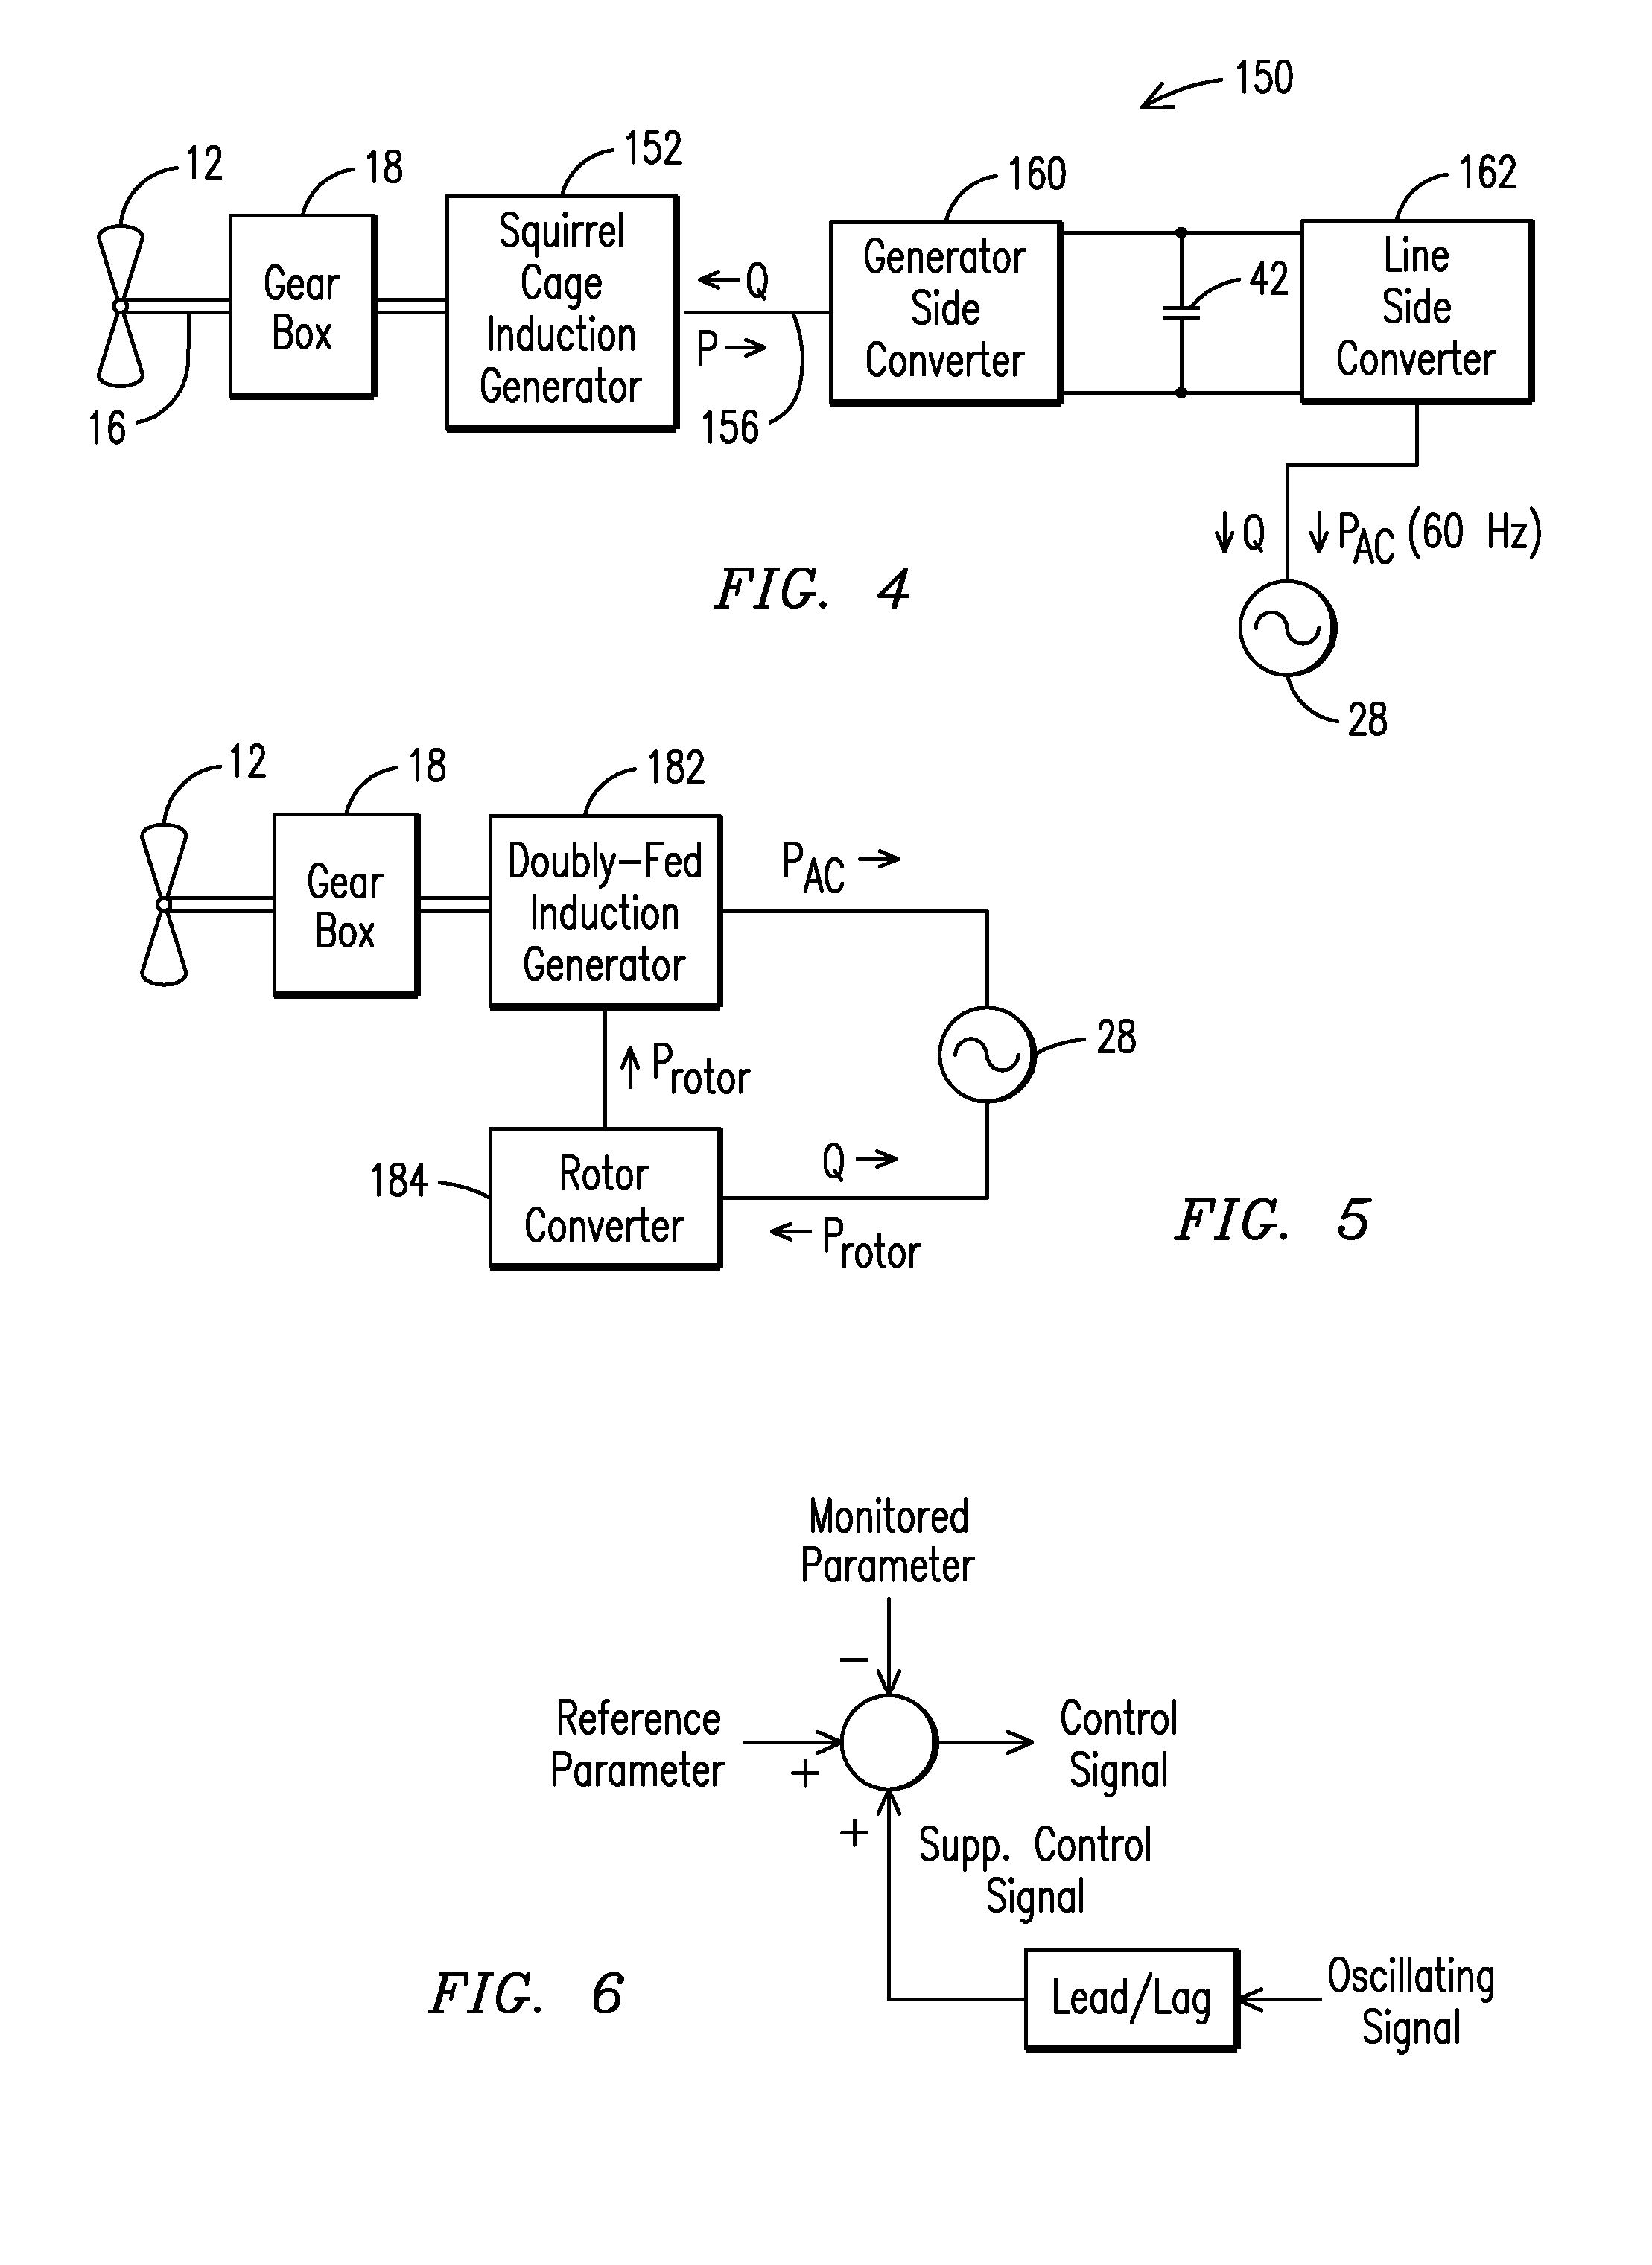 Power Oscillation Damping Employing a Full or Partial Conversion Wind Turbine